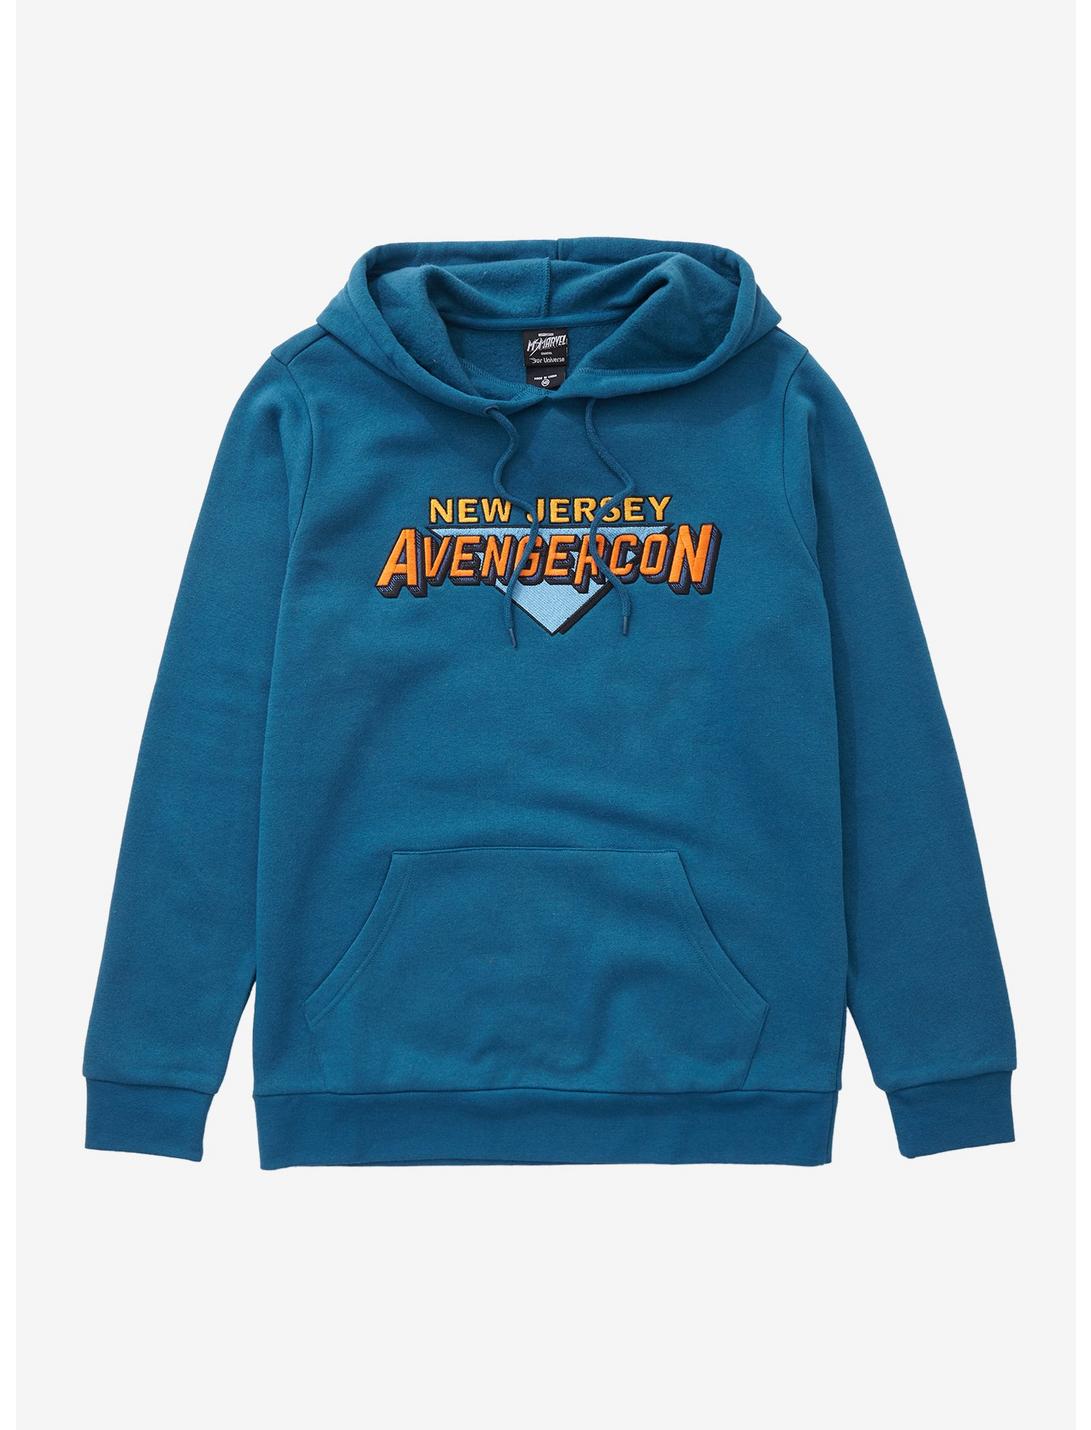 Our Universe Marvel Ms. Marvel New Jersey AvengerCon Hoodie - BoxLunch Exclusive, BLUE, hi-res